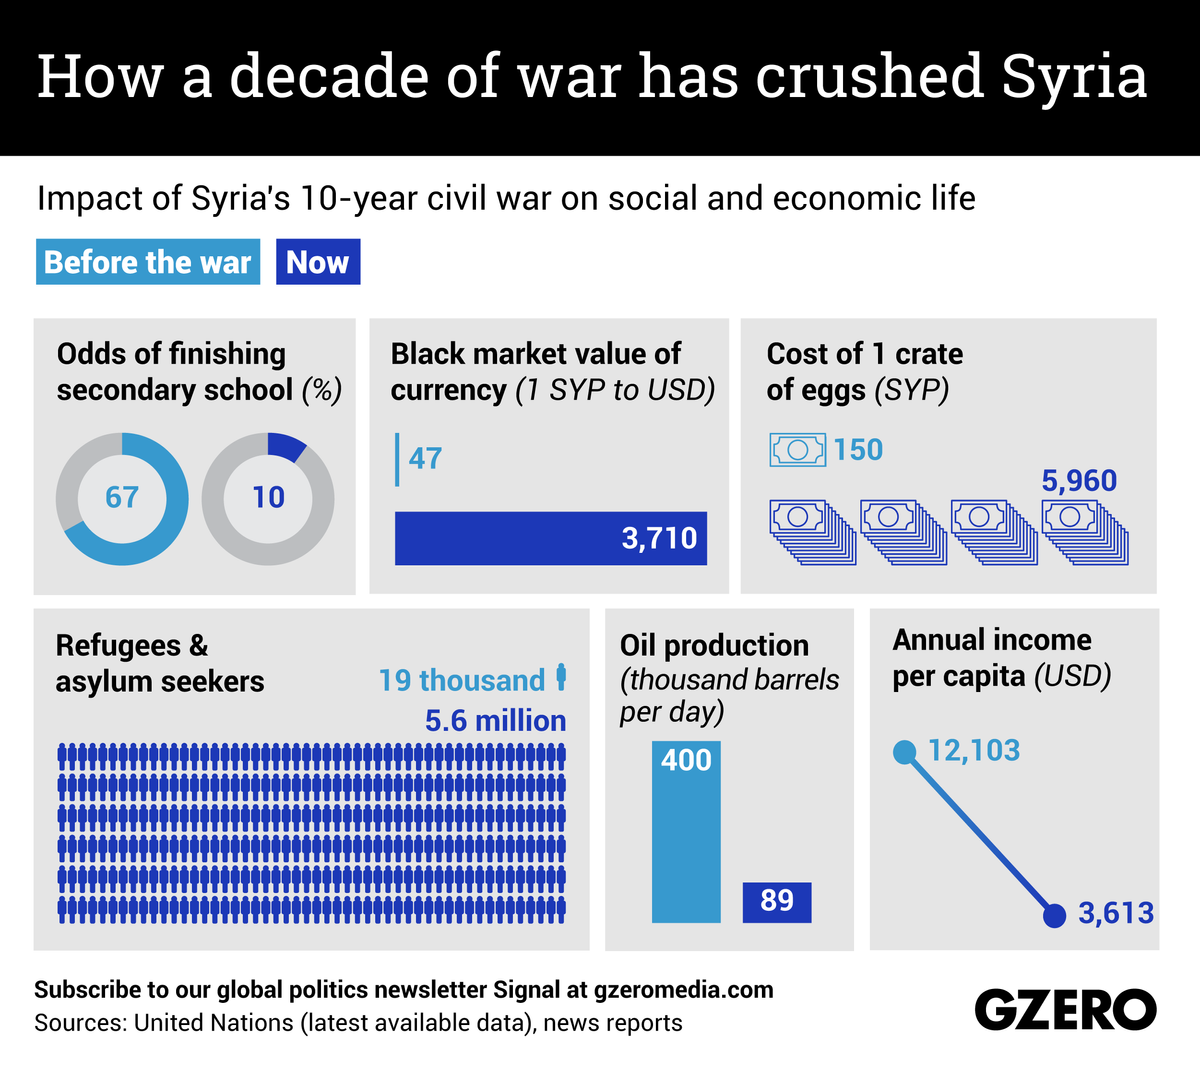 The Graphic Truth: How a decade of war has crushed Syria